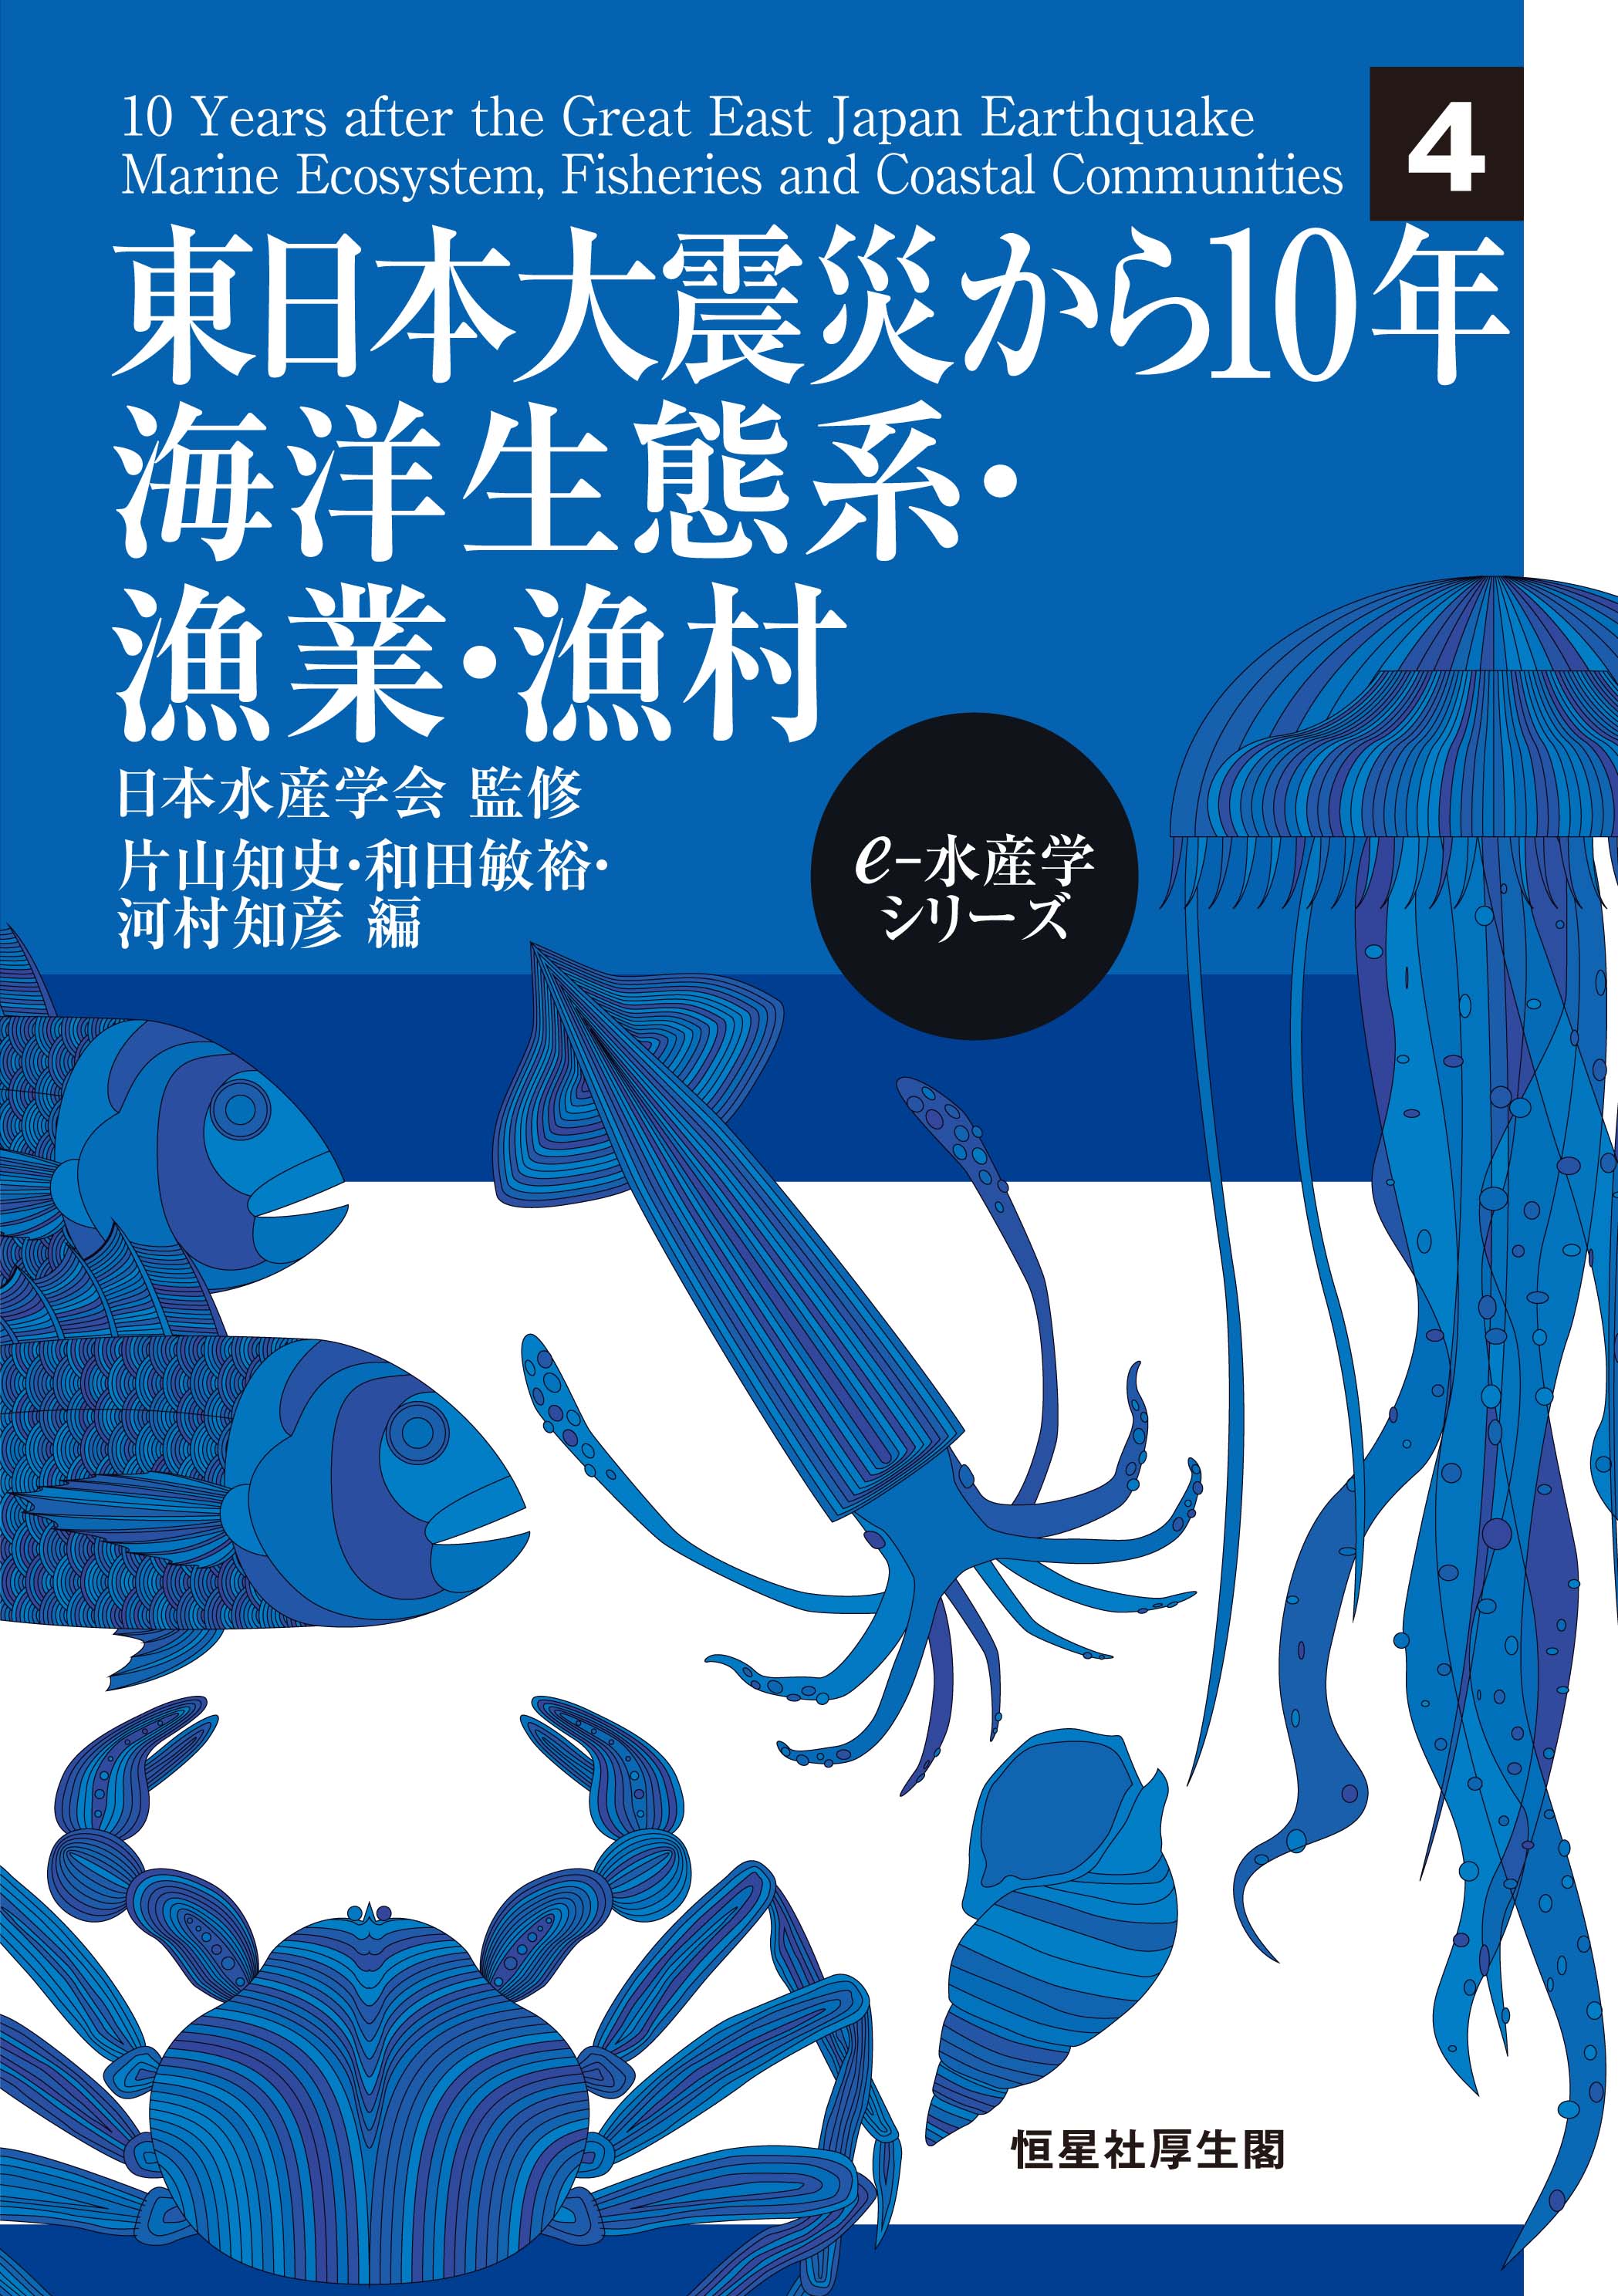 A blue cover with illustrations of creatures of the sea